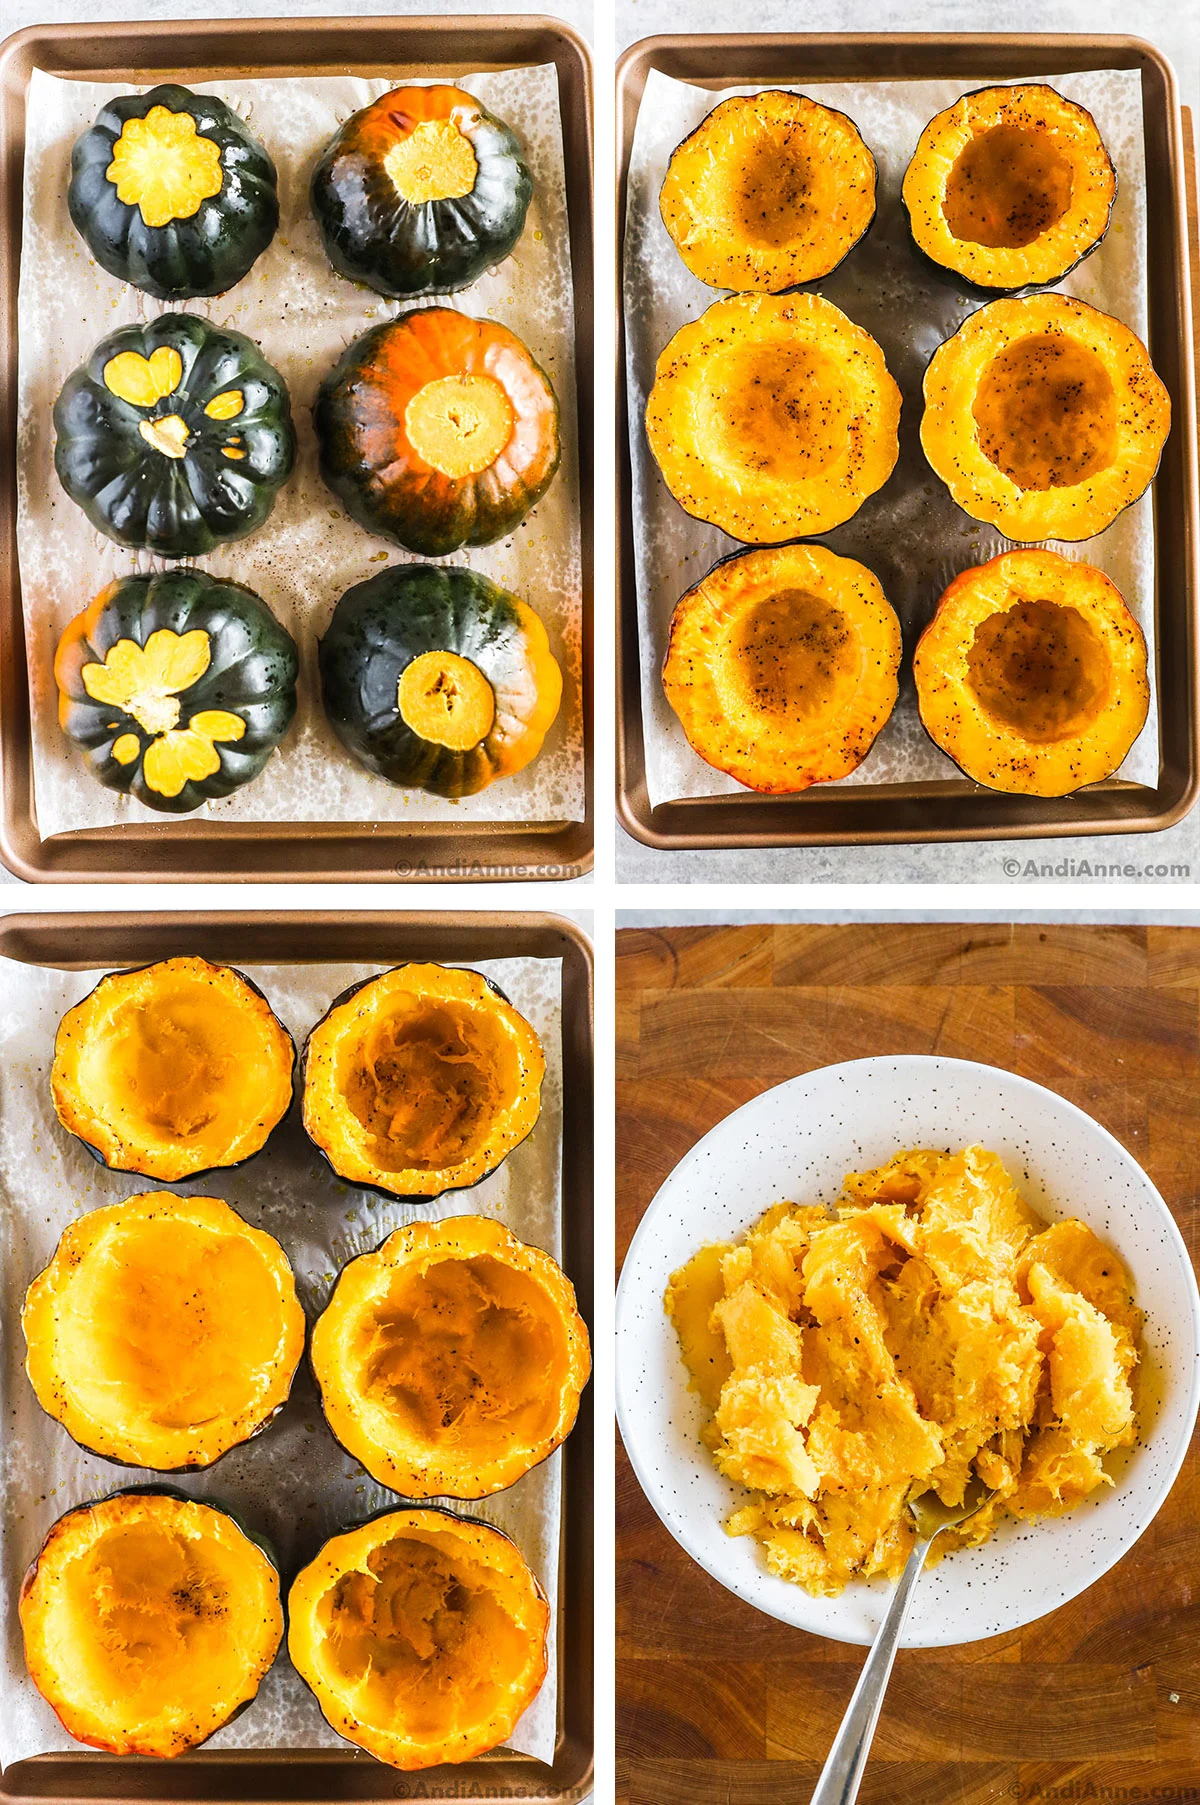 Cooked acorn squash sliced in half and baked, then insides slightly scooped out and added to a plate.